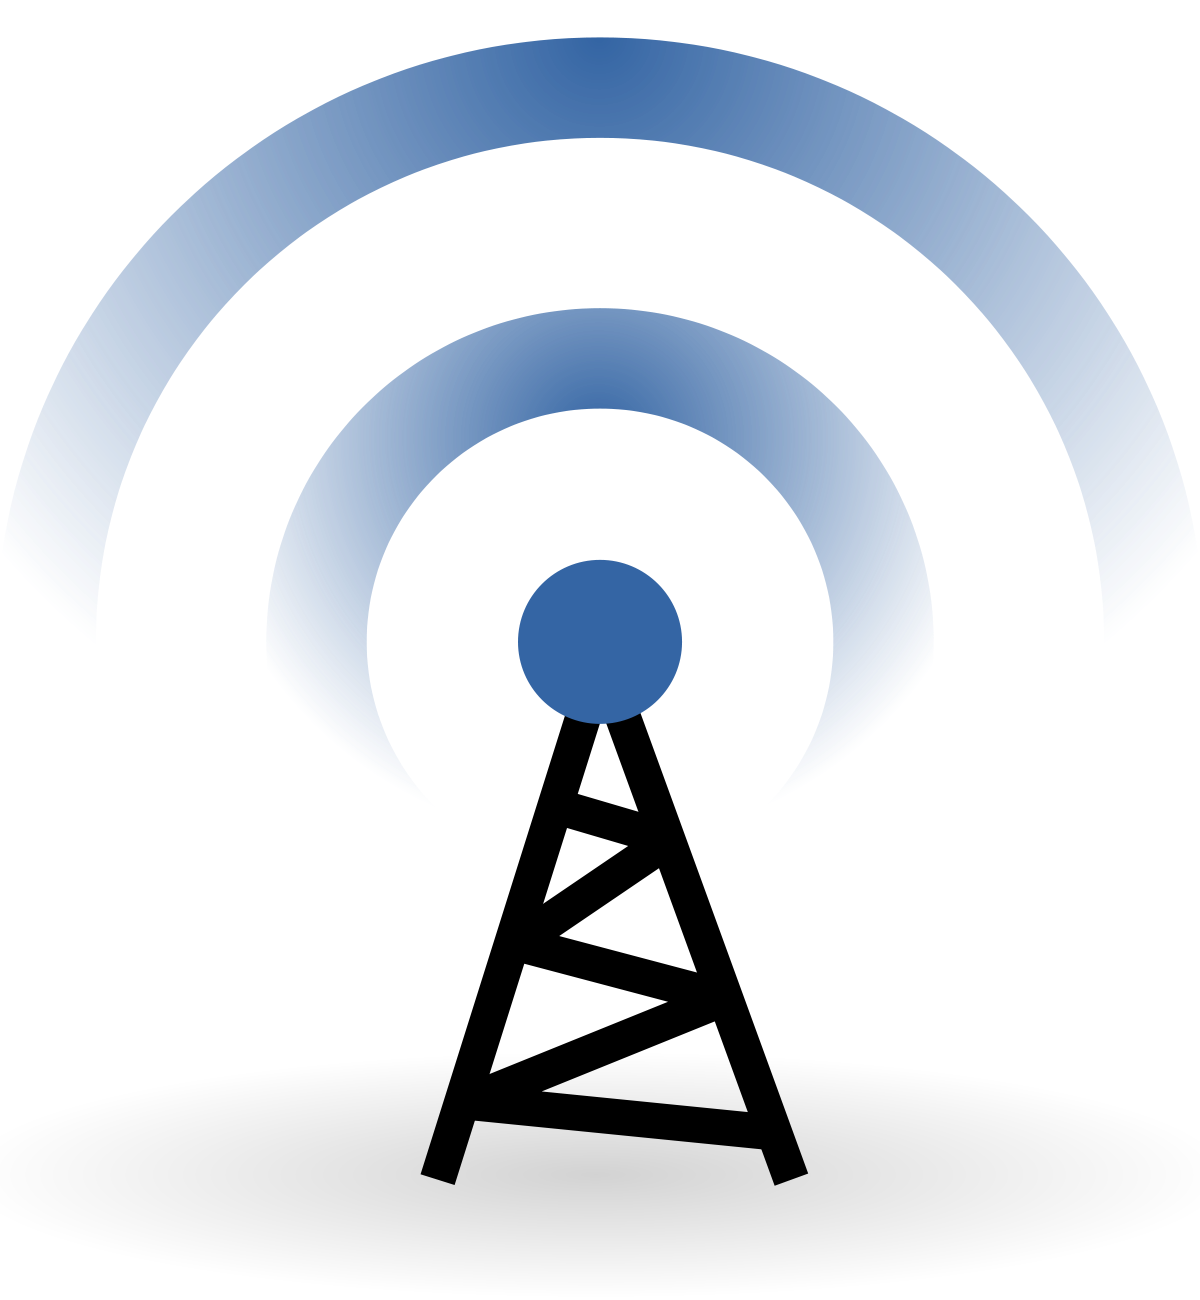 Multiple devices connected to a WiFi network